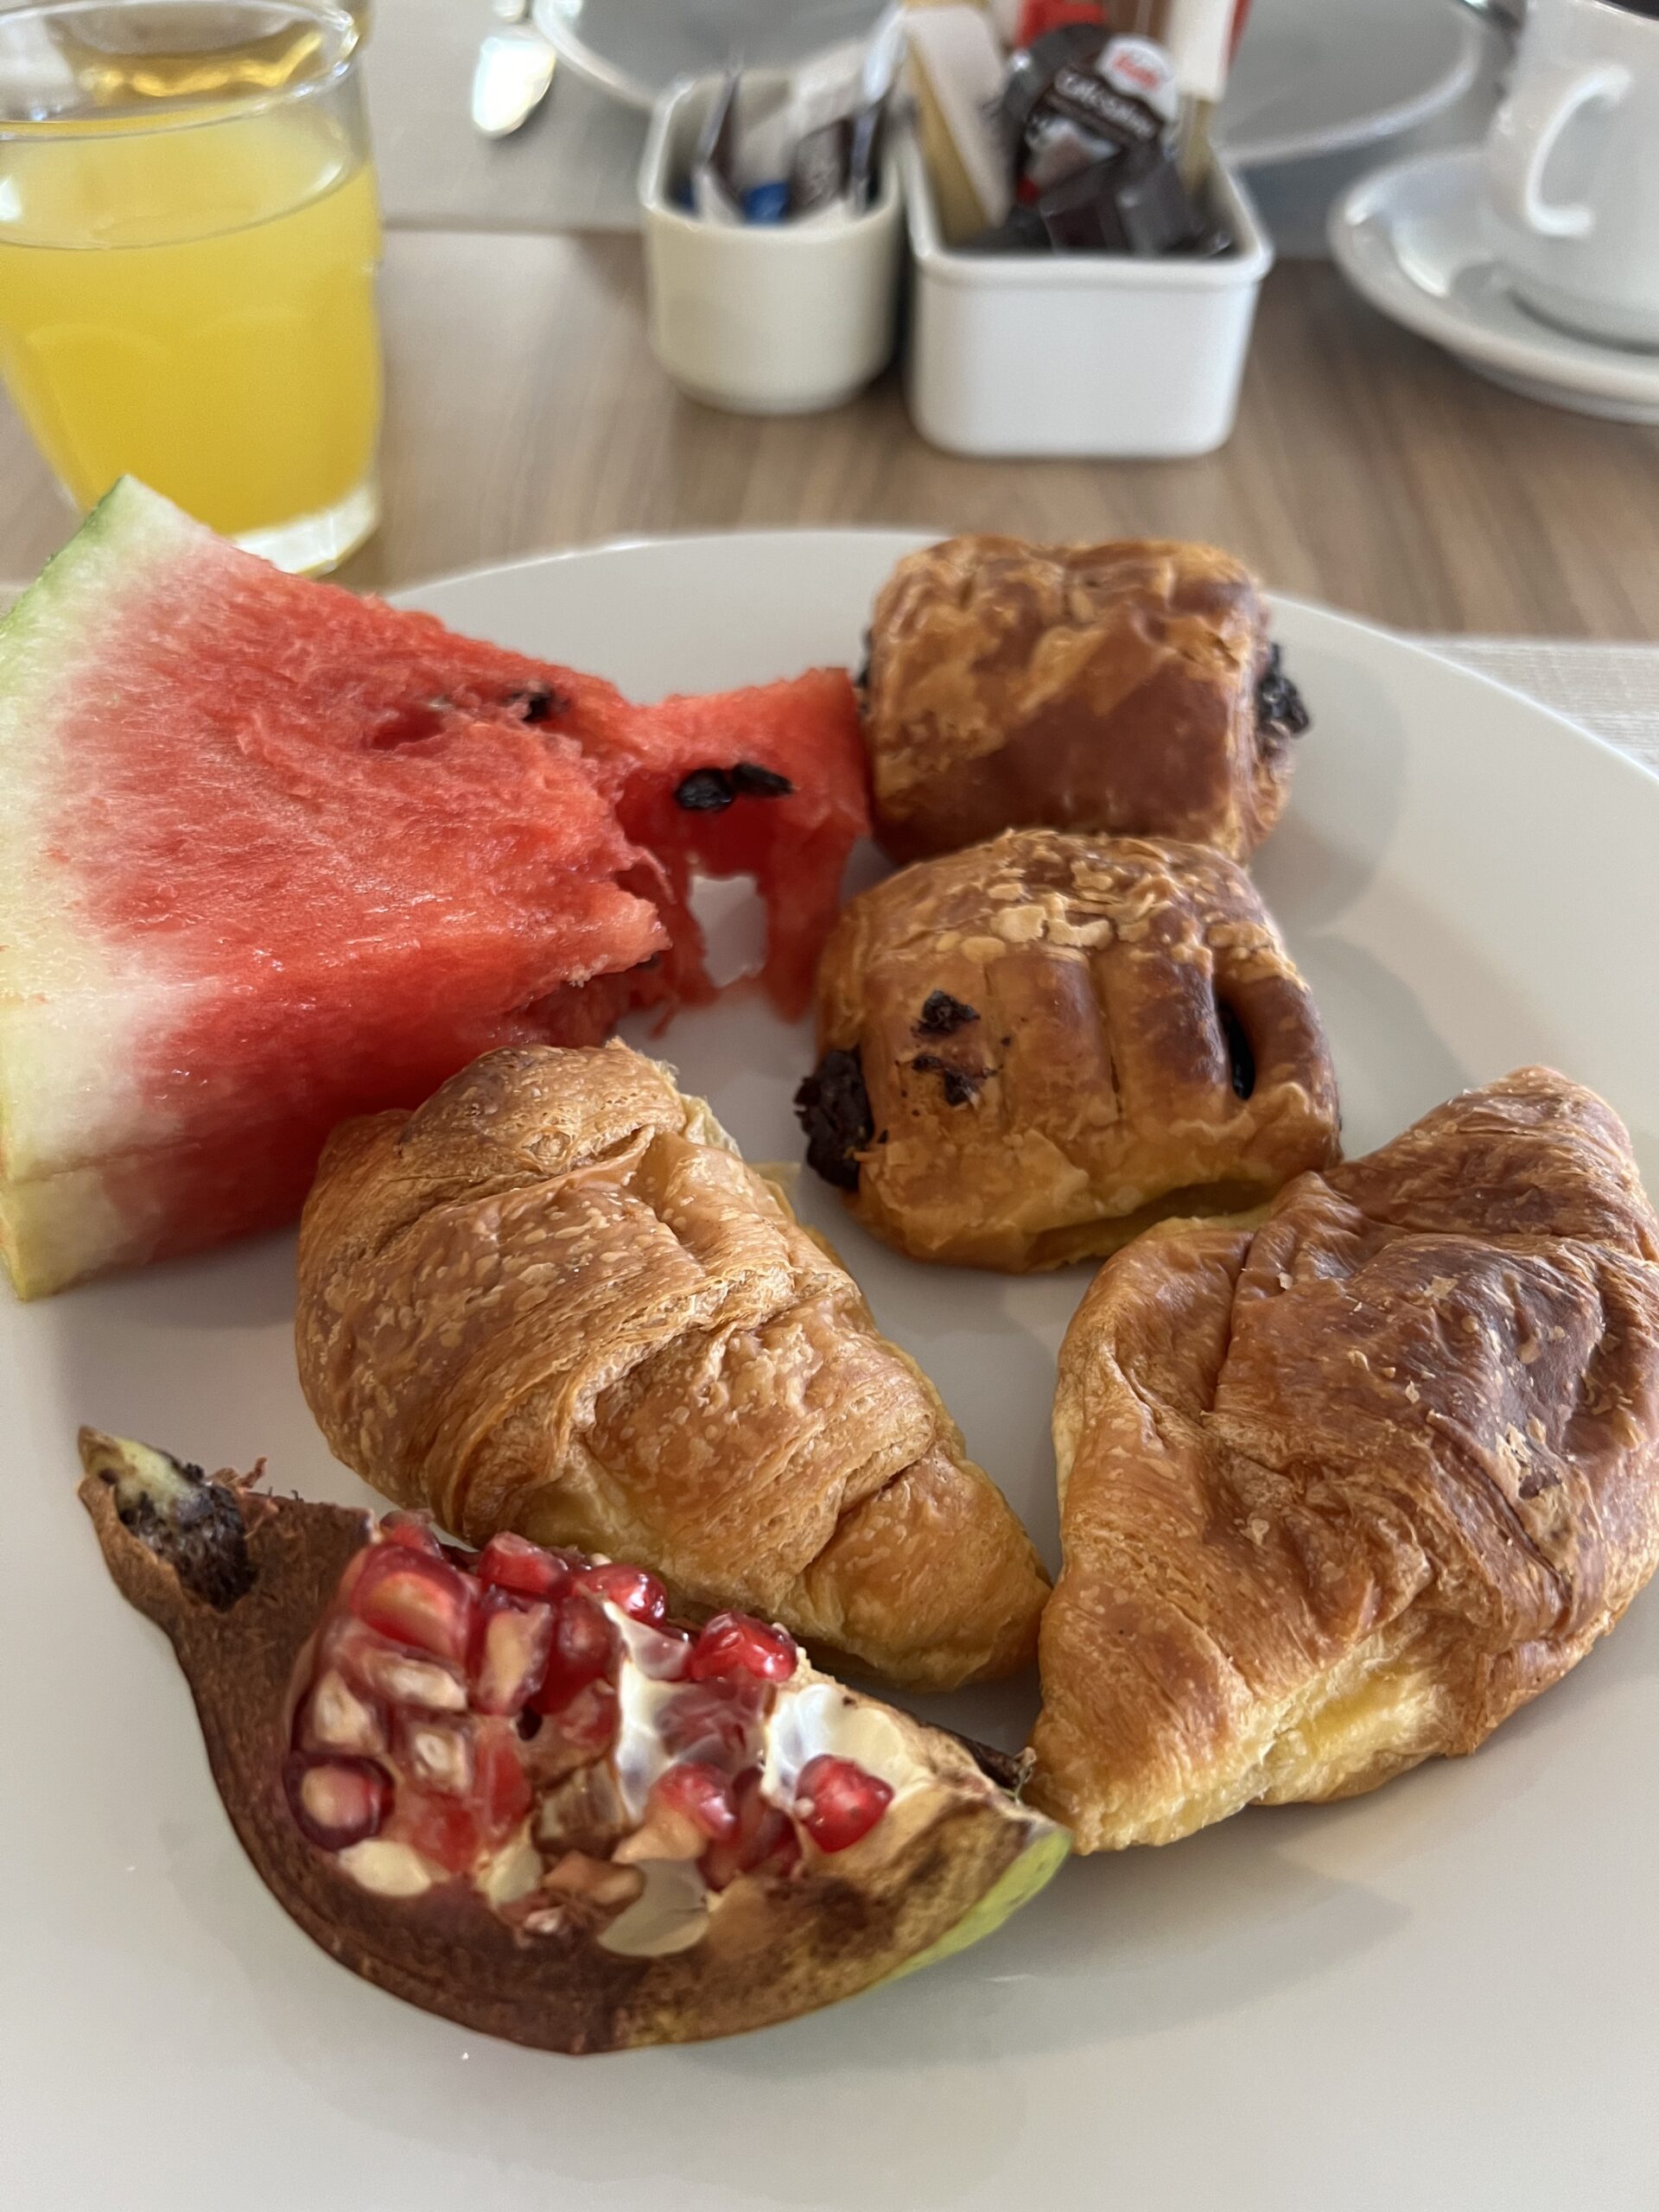 Tiny croissants and fruit for brekkie